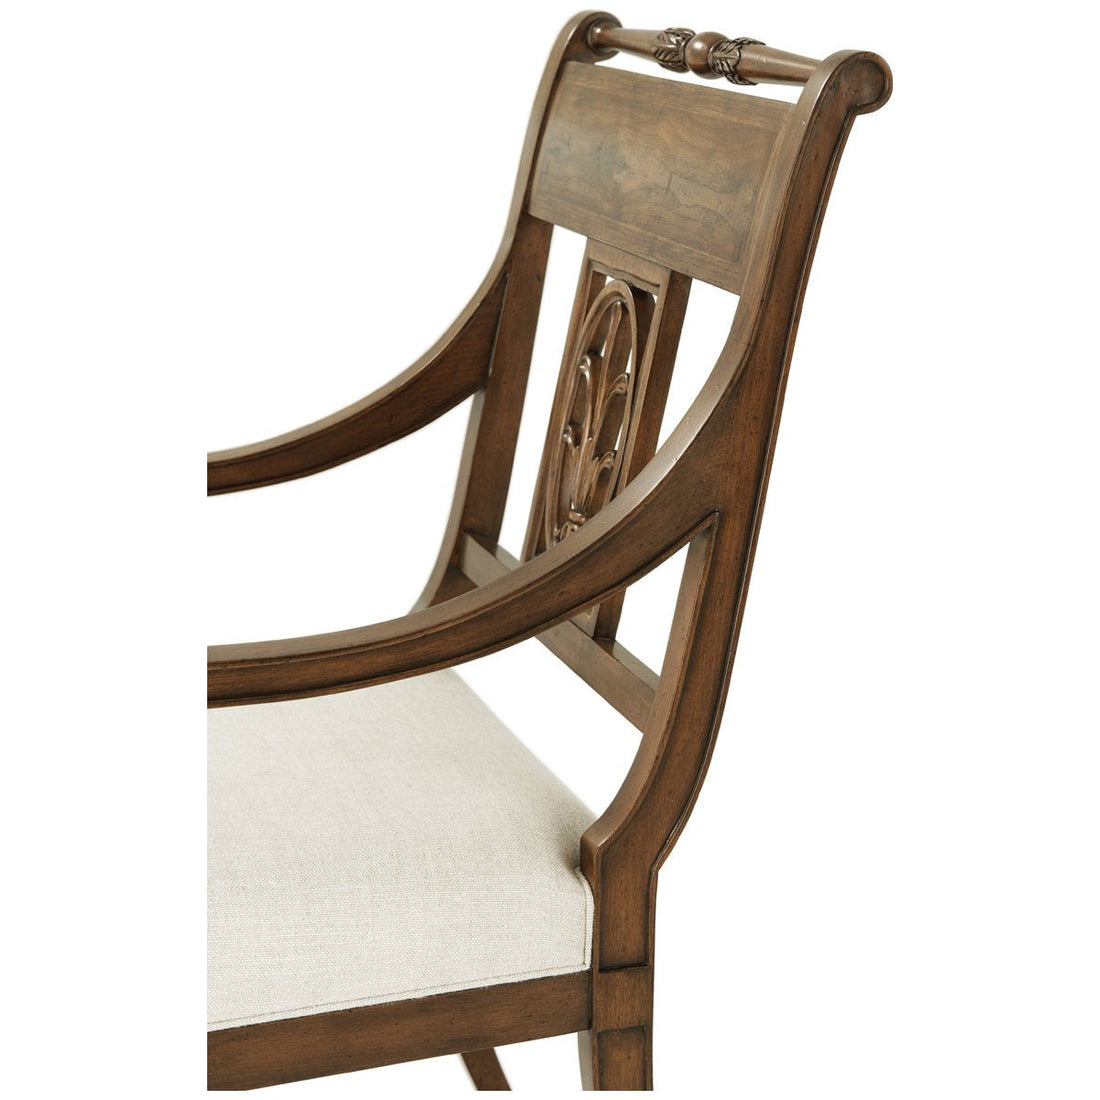 Theodore Alexander The Iven Dining Armchair, Set of 2